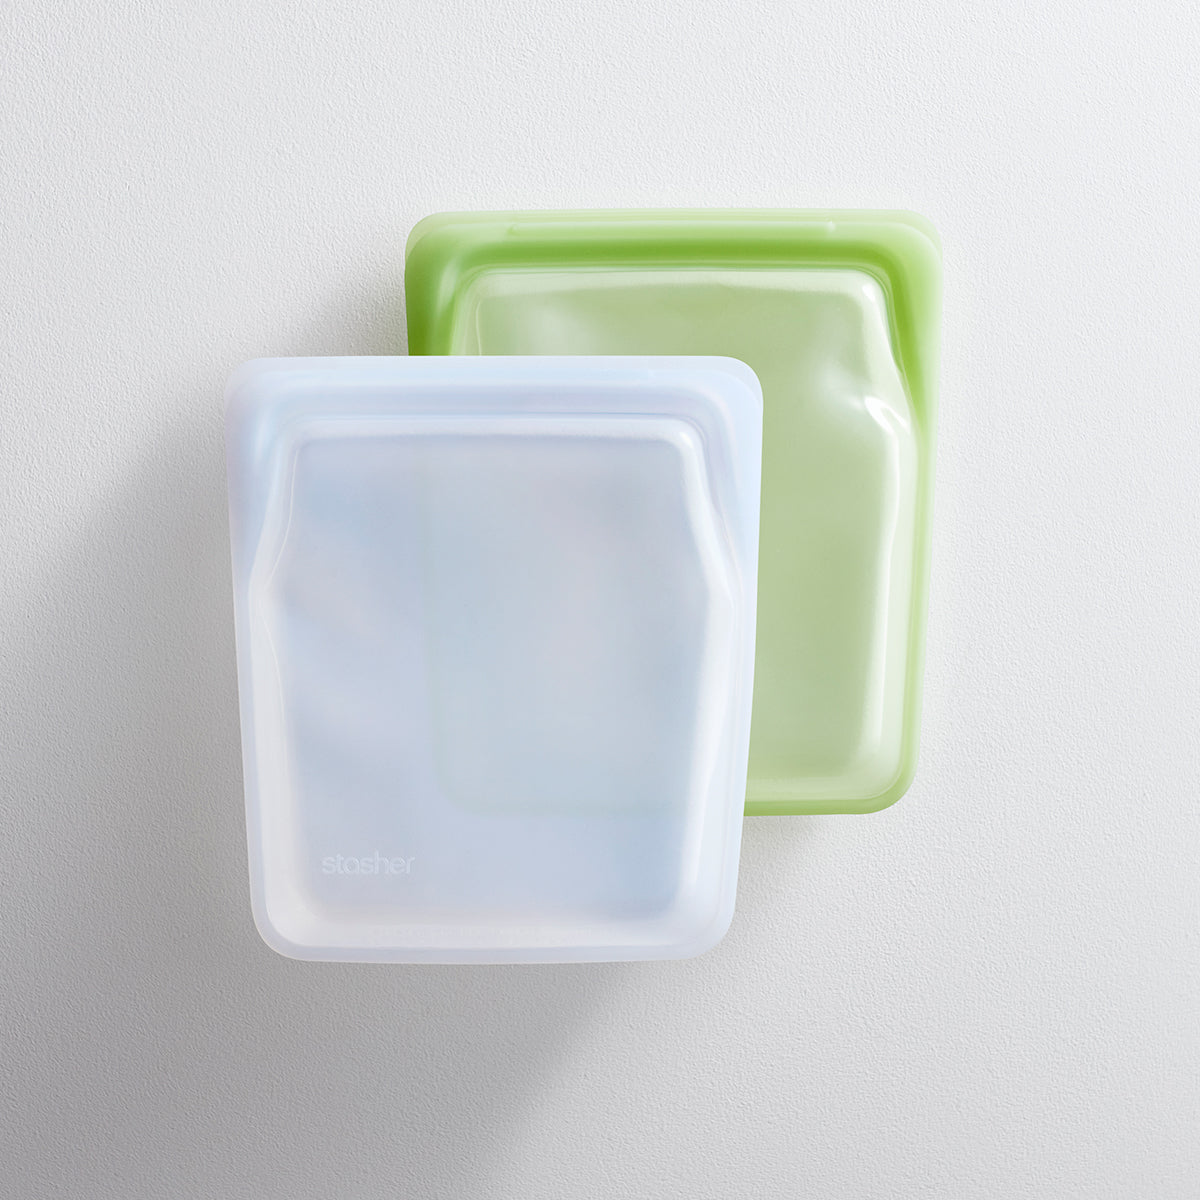 clear/green: Reusable Silicone Stasher Quart Bag Duo Clear & Green